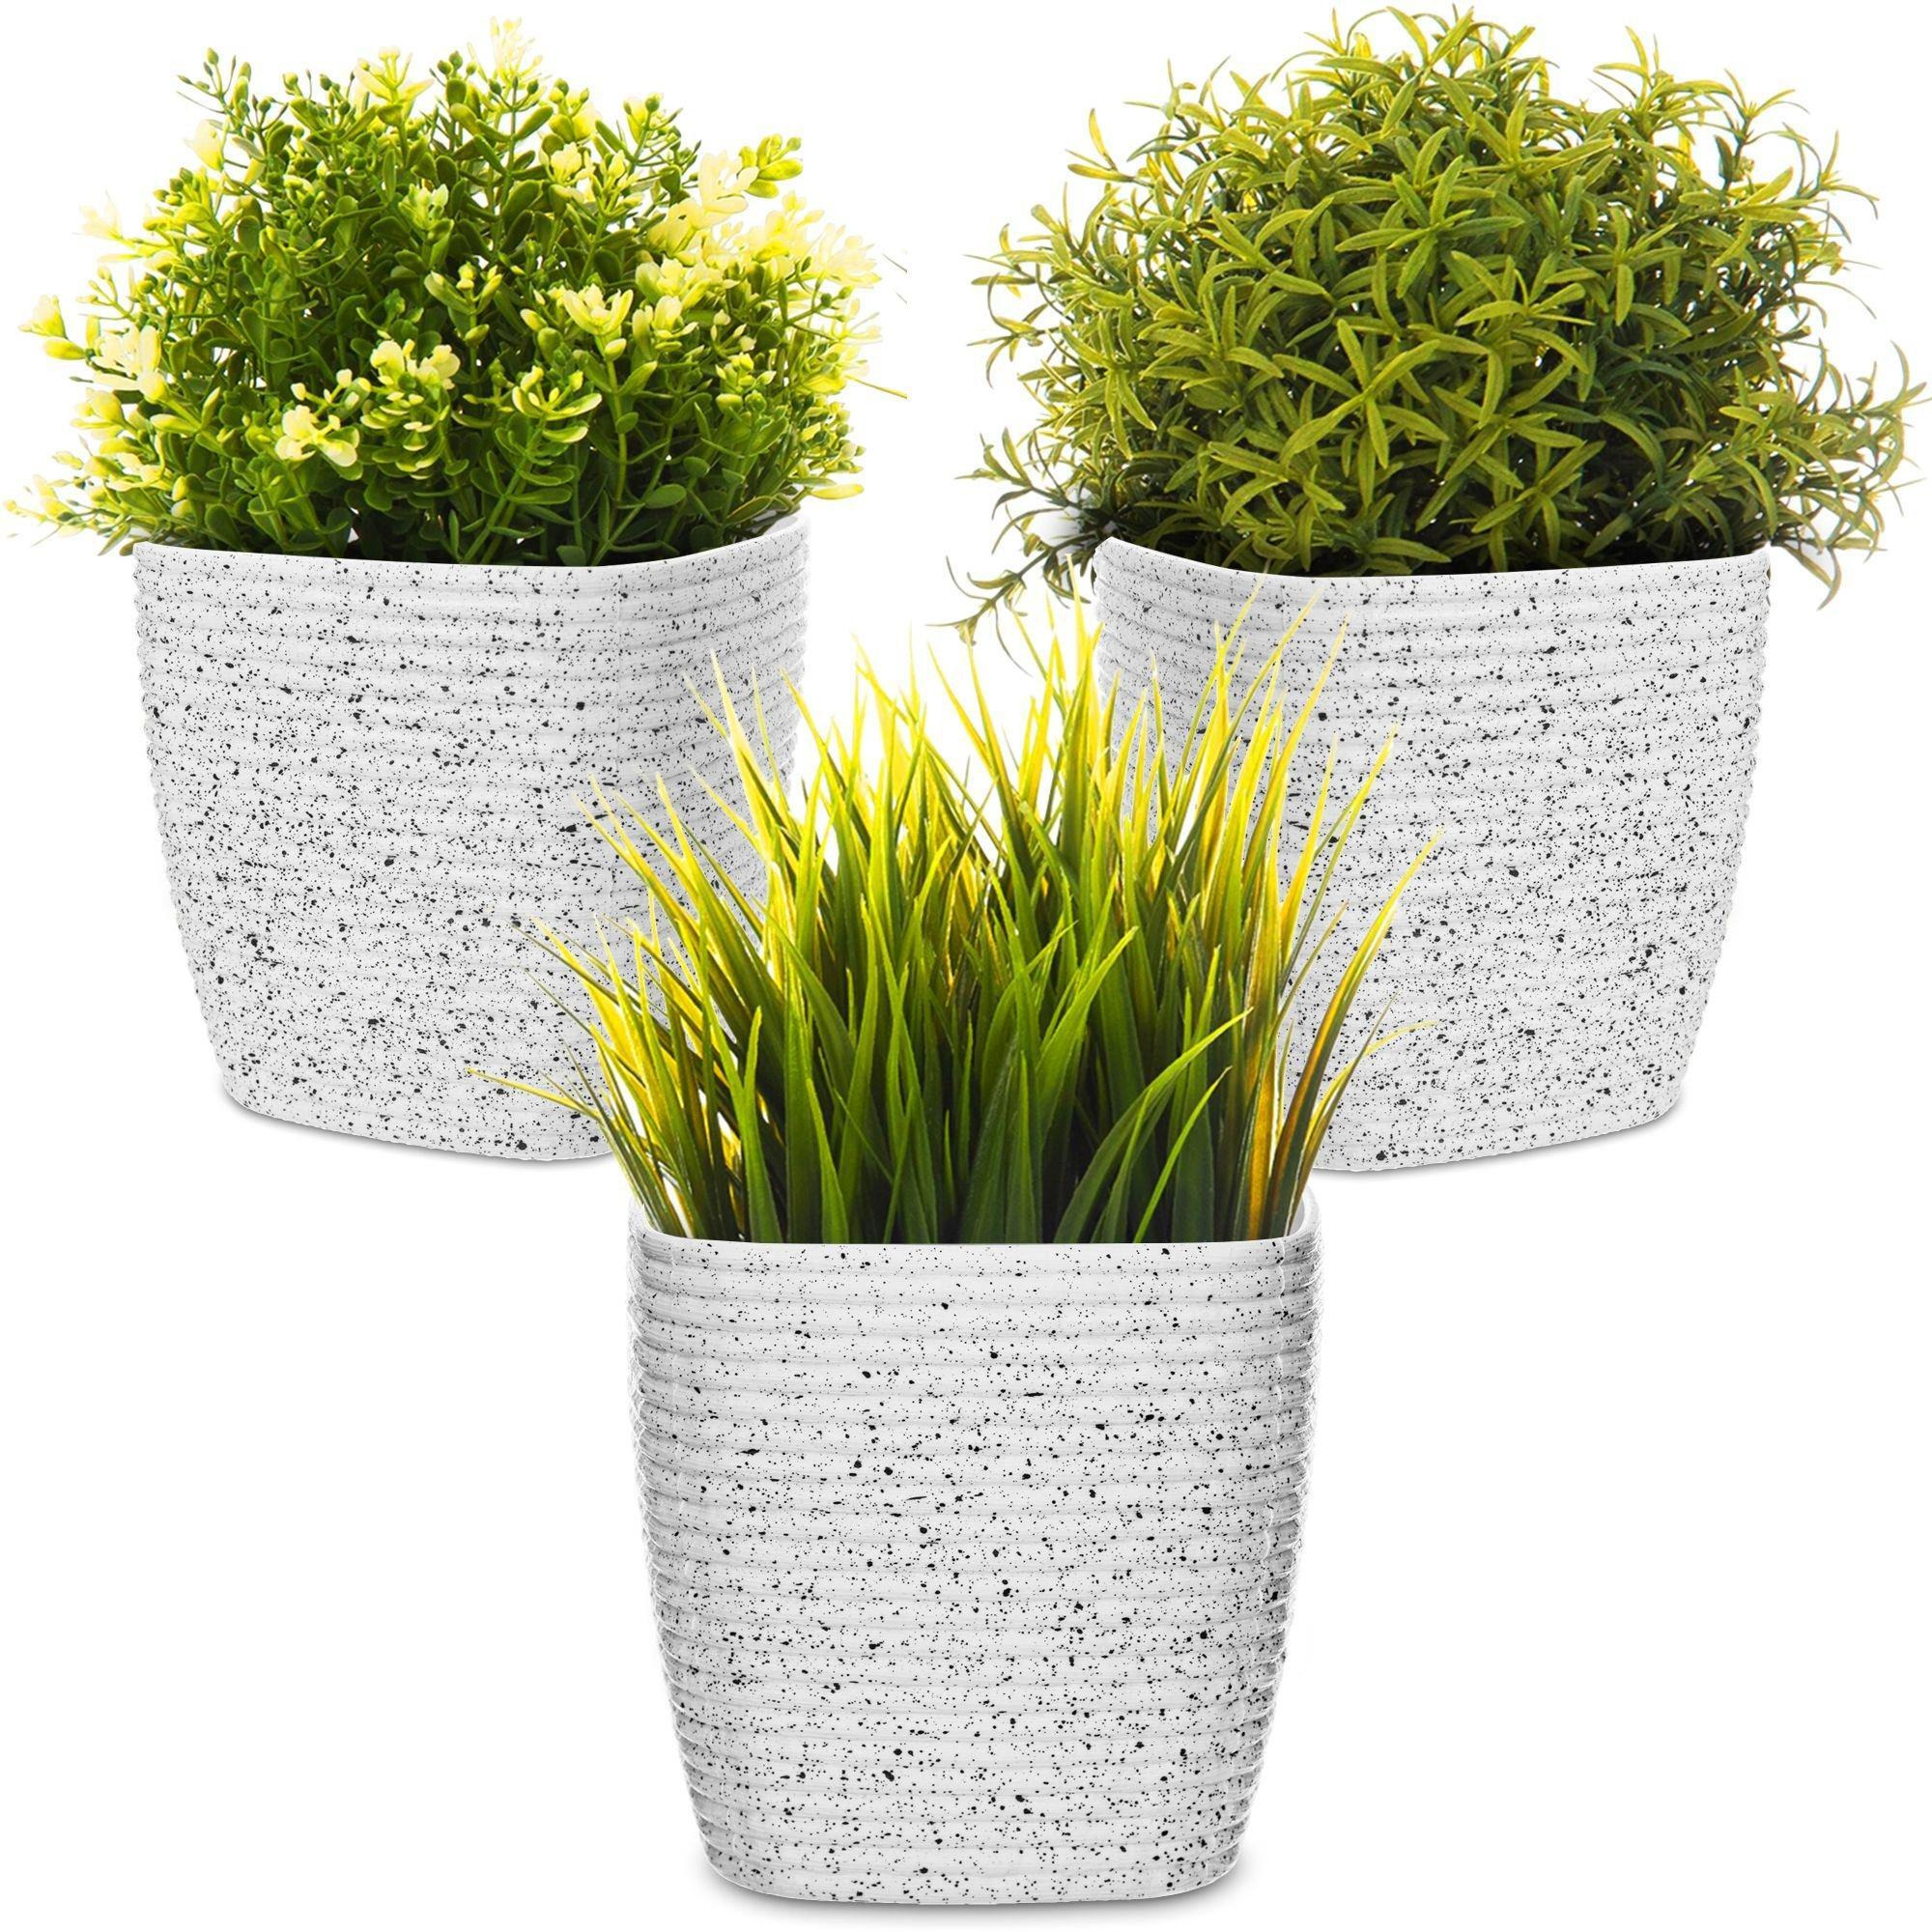 Flower and Plant Pot with Stripe Design for Indoor or Outdoor Use - (Set of 3, 12 cm) - image 1